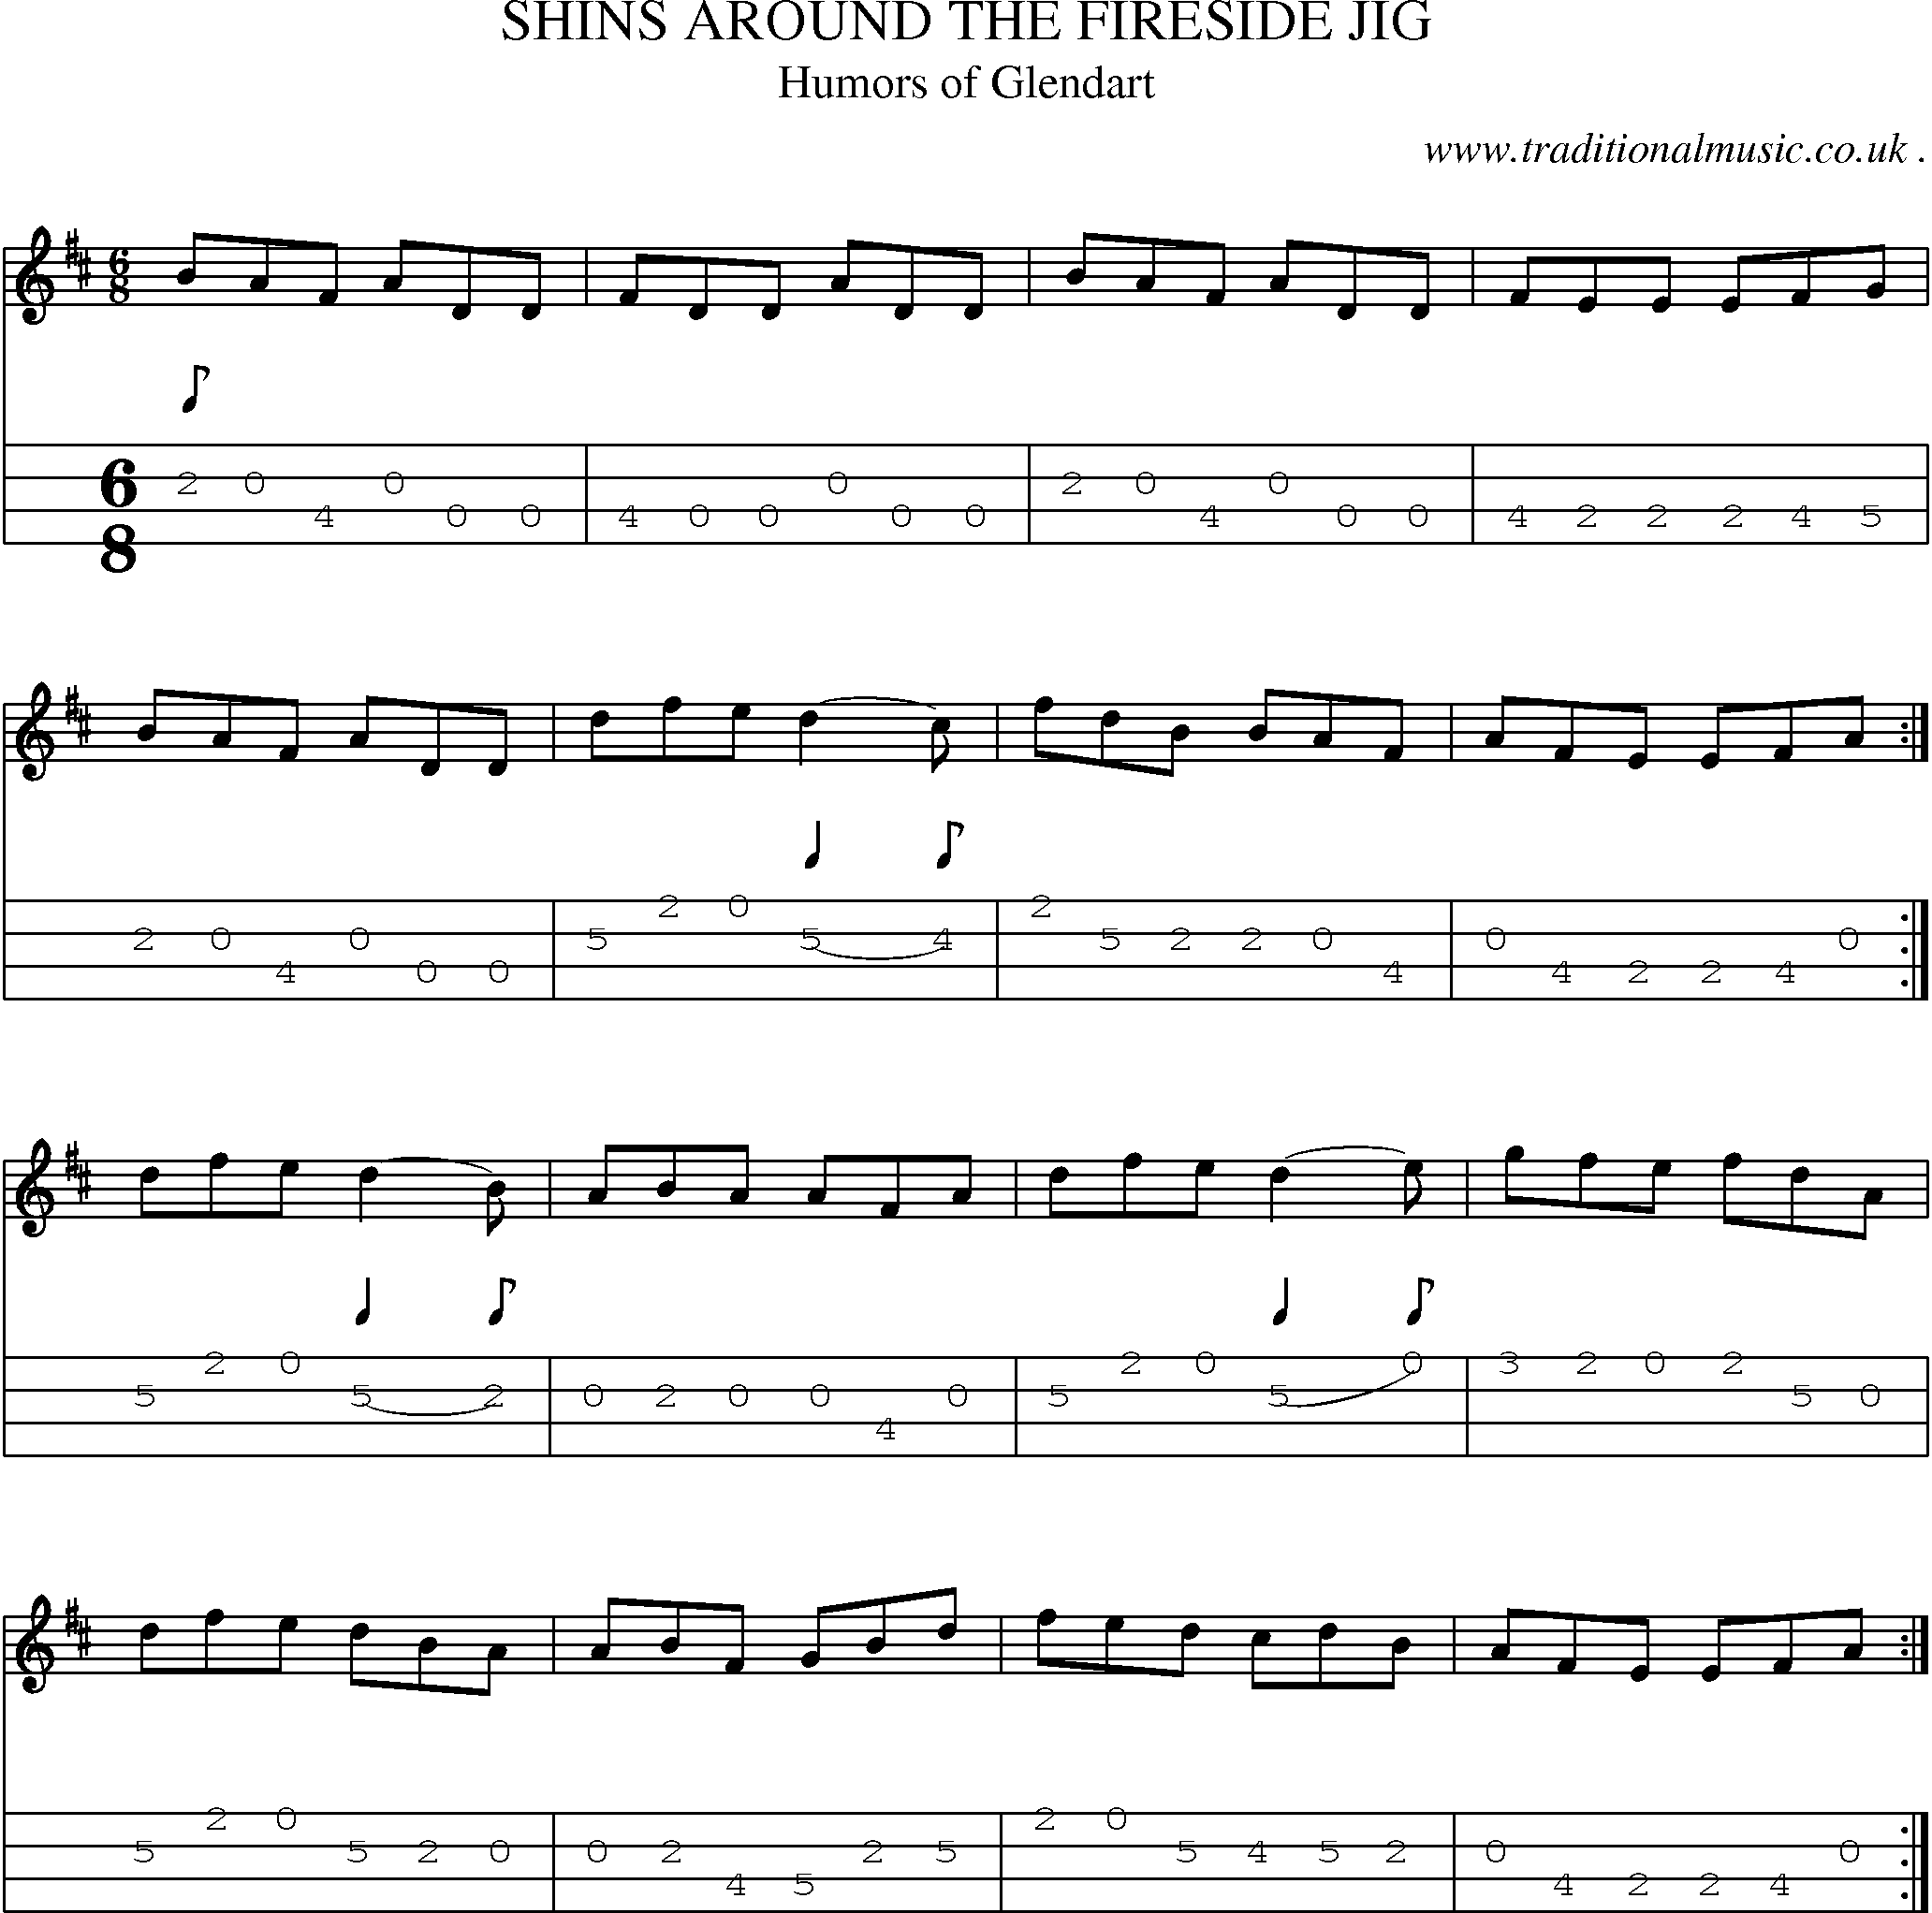 Sheet-Music and Mandolin Tabs for Shins Around The Fireside Jig